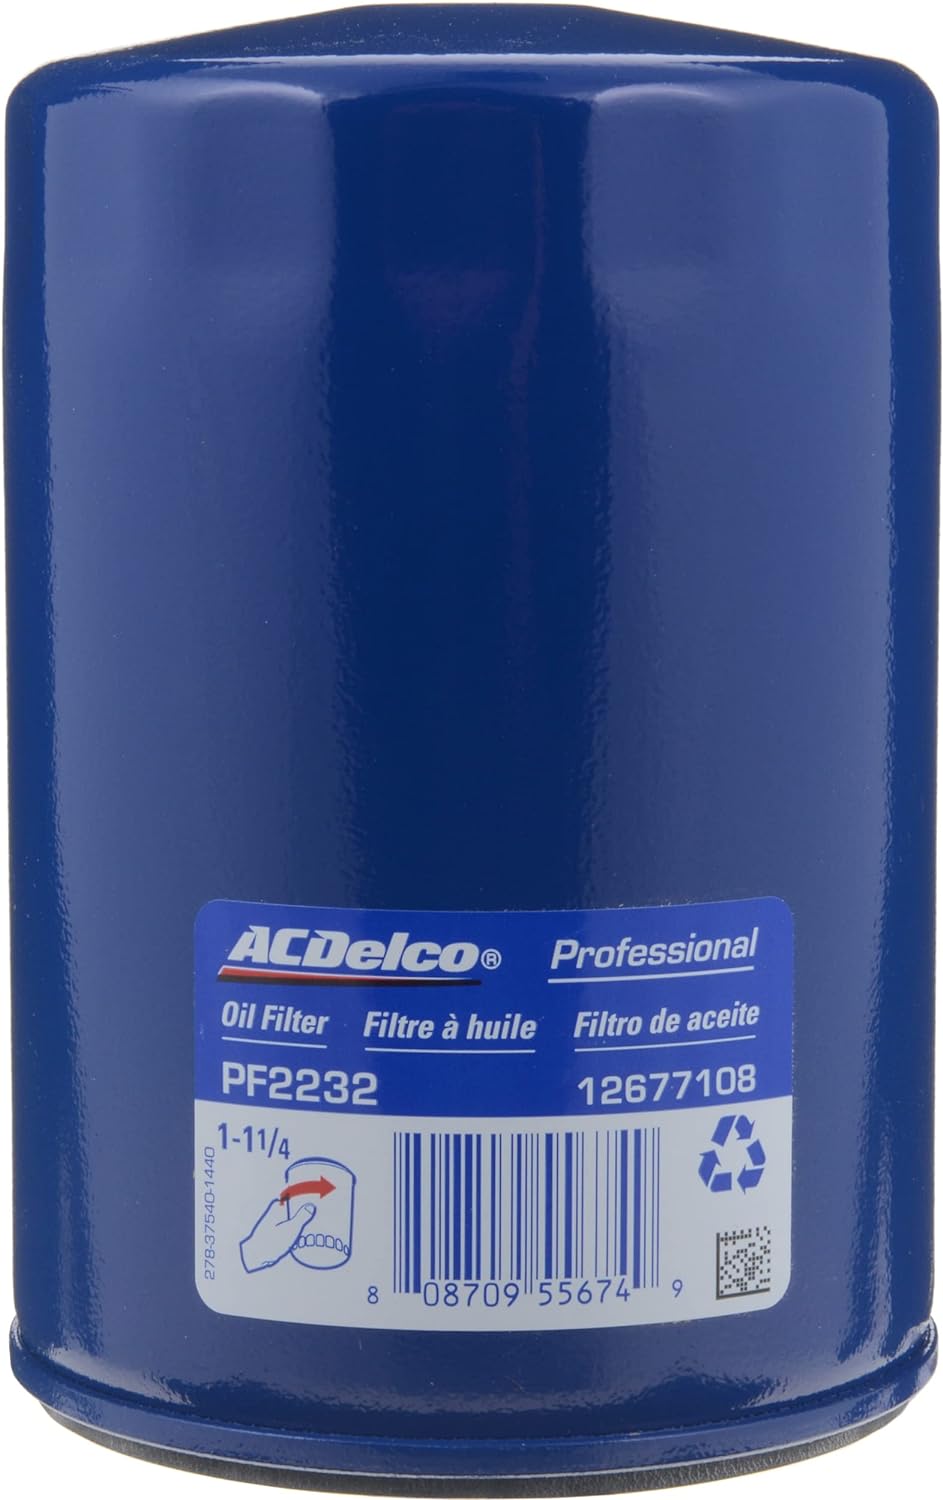 ACDelco UPF52 Specialty Ultraguard Engine Oil Filter 